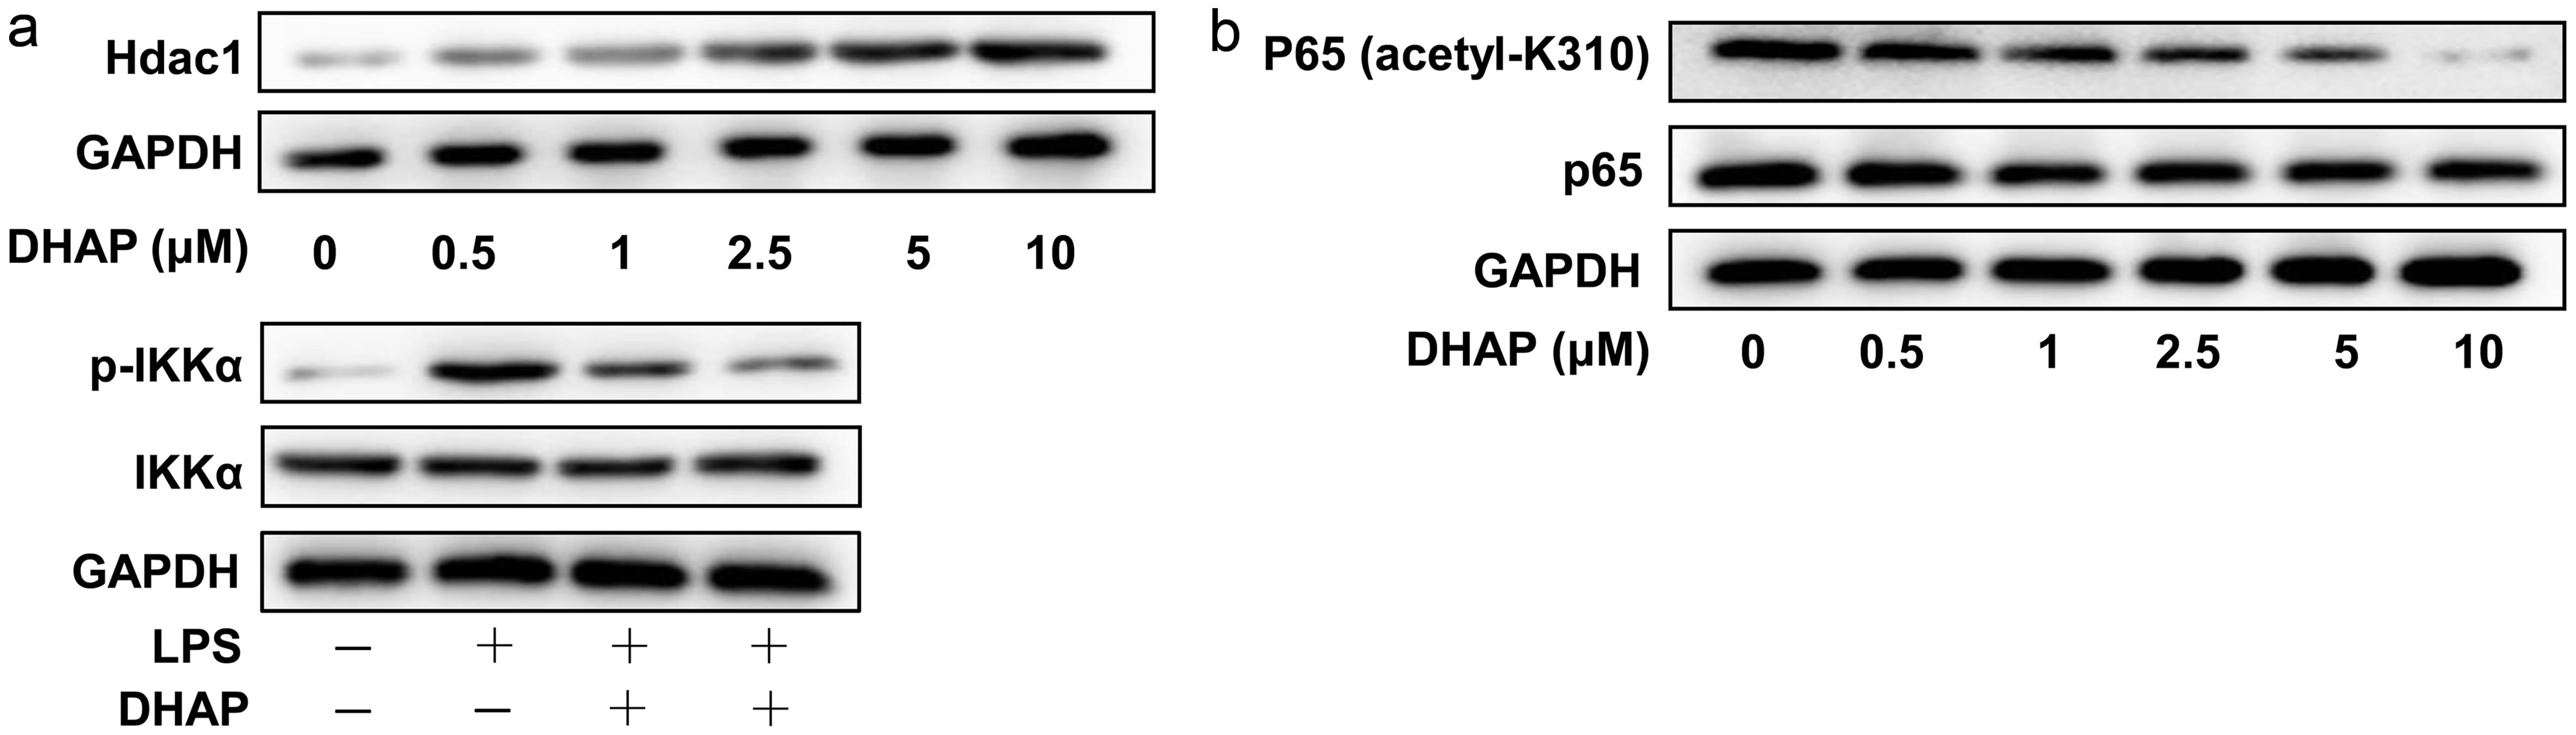 DHAP binds to Hdac1 thereby inhibiting p65 acetylation and NF-κB activation.